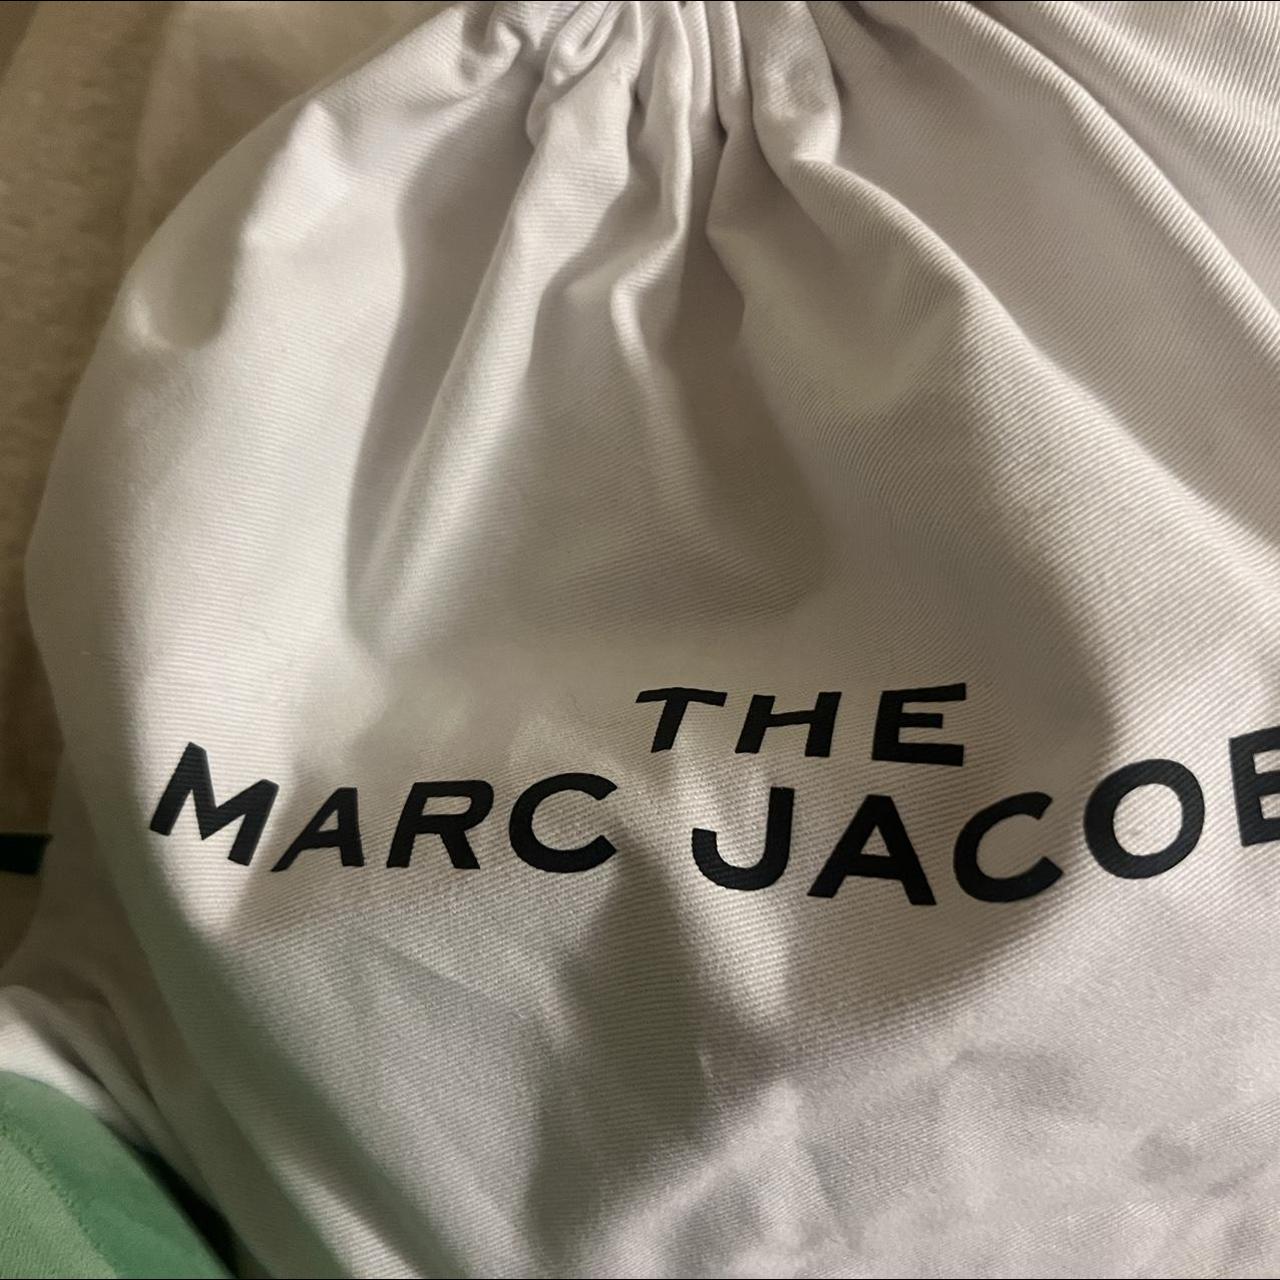 Marc Jacobs Snapshot Airbrush Bag - For Sale in Kelowna - Castanet